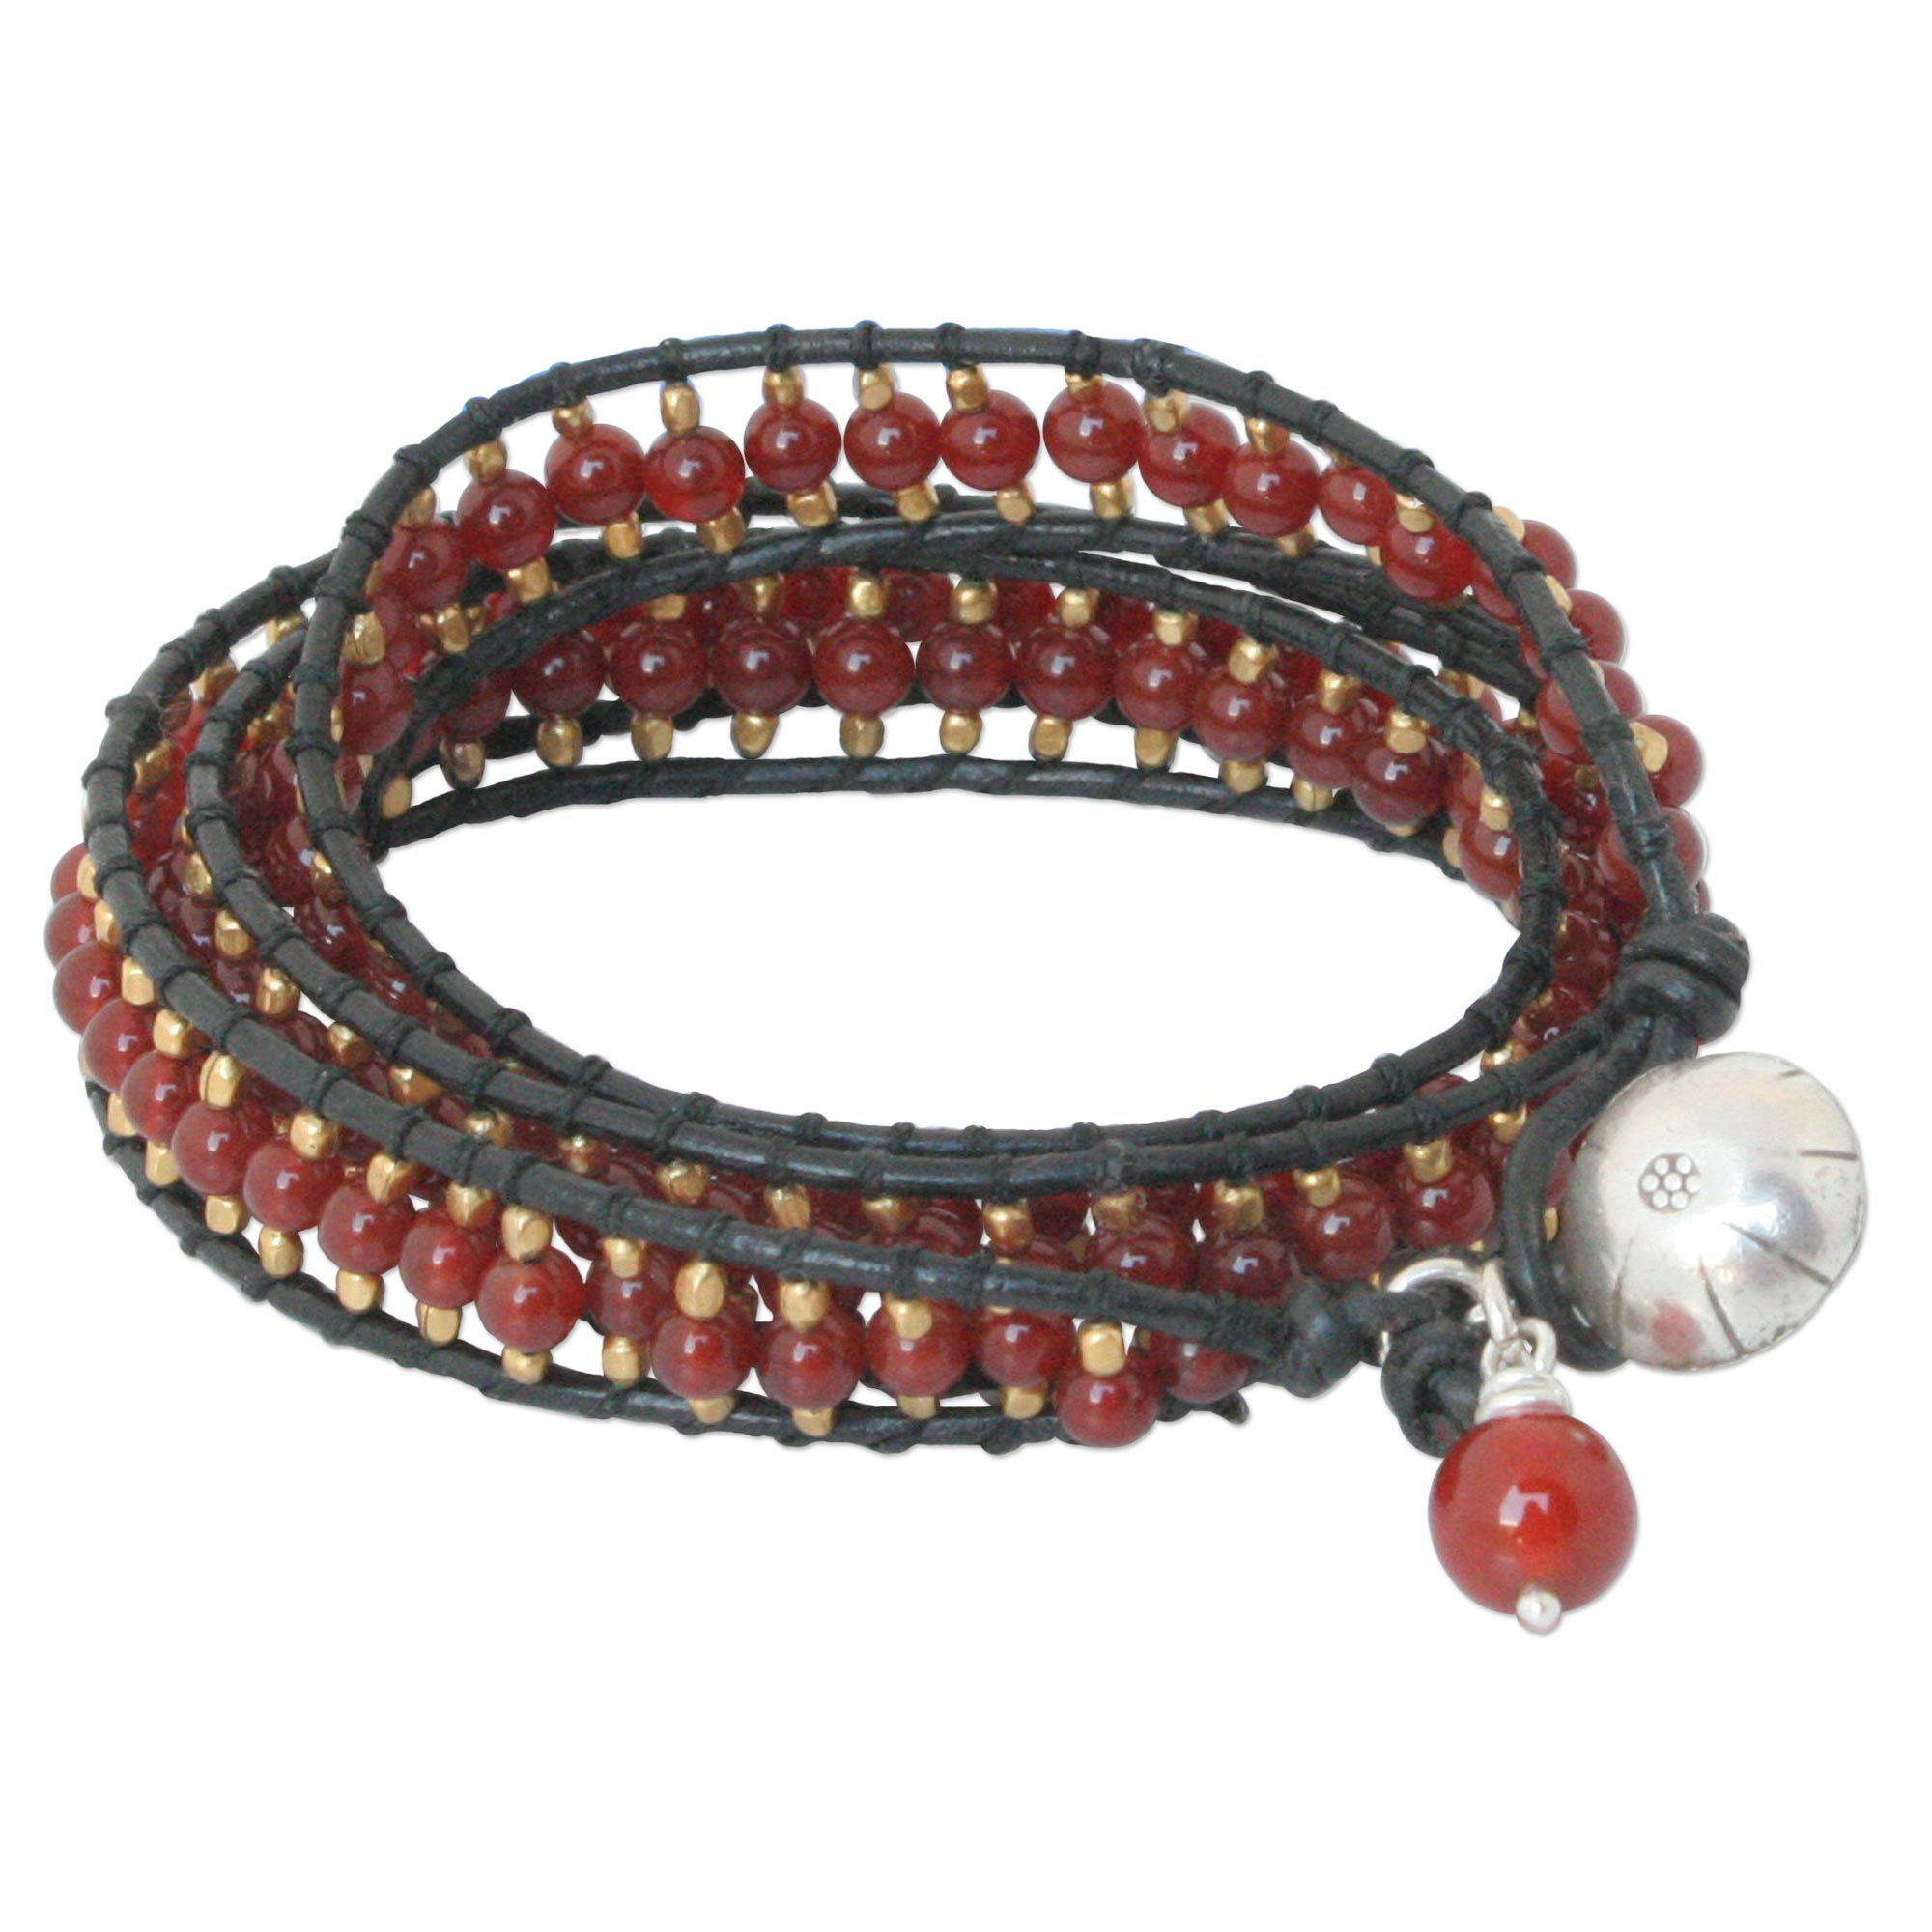 Leather and Carnelian Beaded Bracelet from Thailand - Bright Day | NOVICA